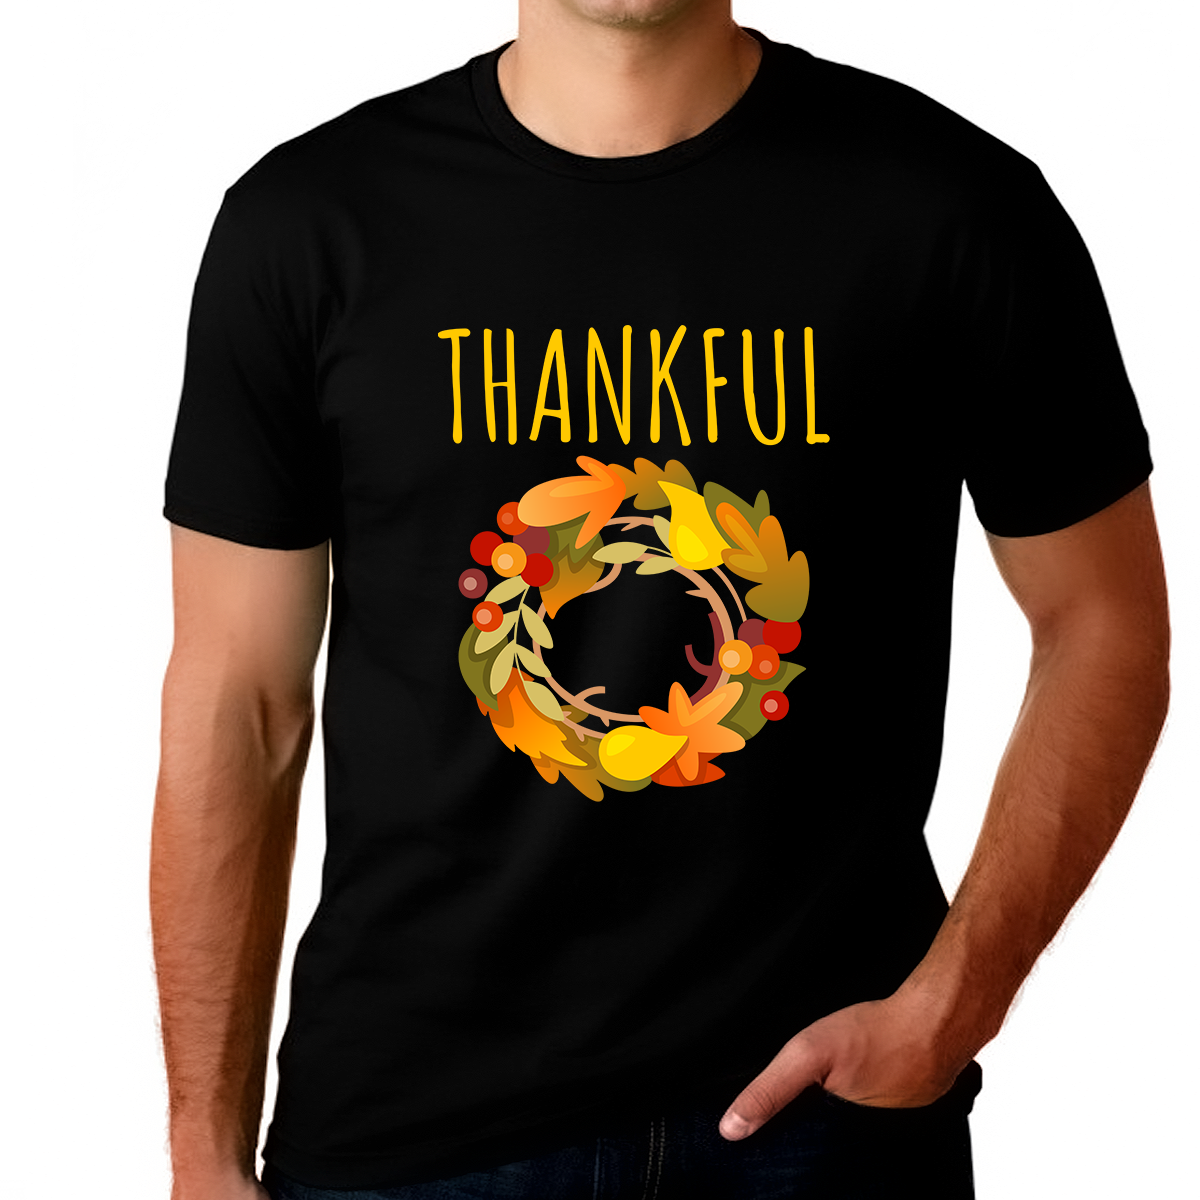 Big and Tall Thanksgiving Shirts for Men Fall Clothes for Men Fall Shirts for Men Thankful Shirts for Men